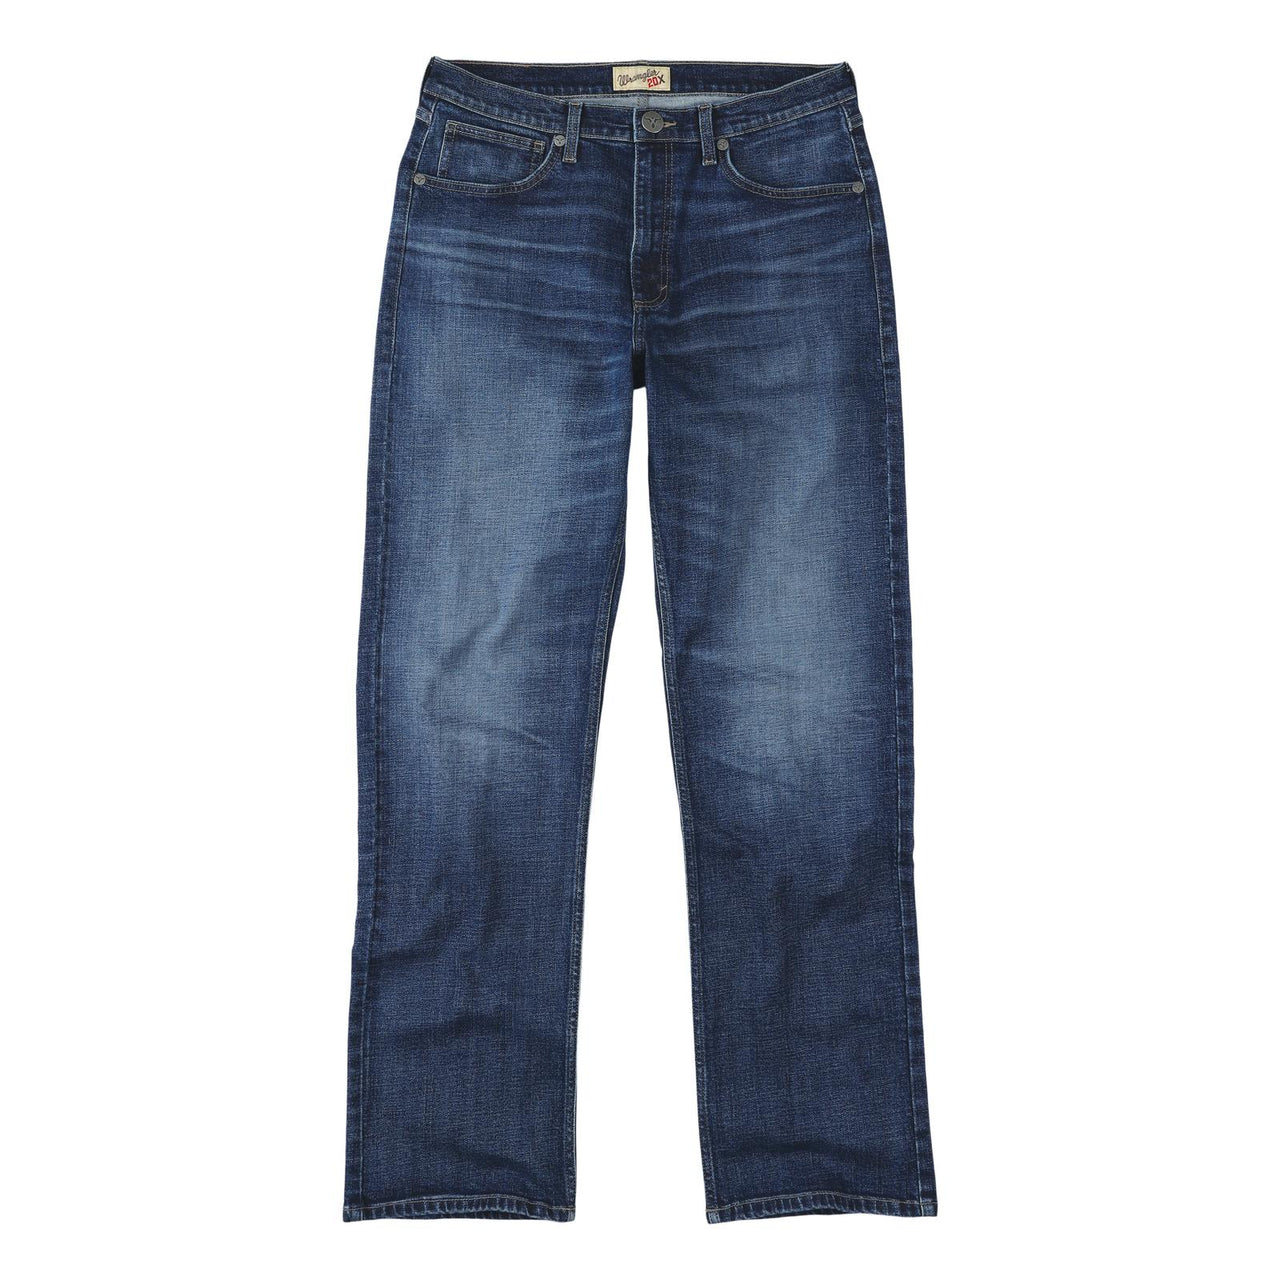 Wrangler Men's 20X 33 Extreme Relaxed Jeans - Sumter